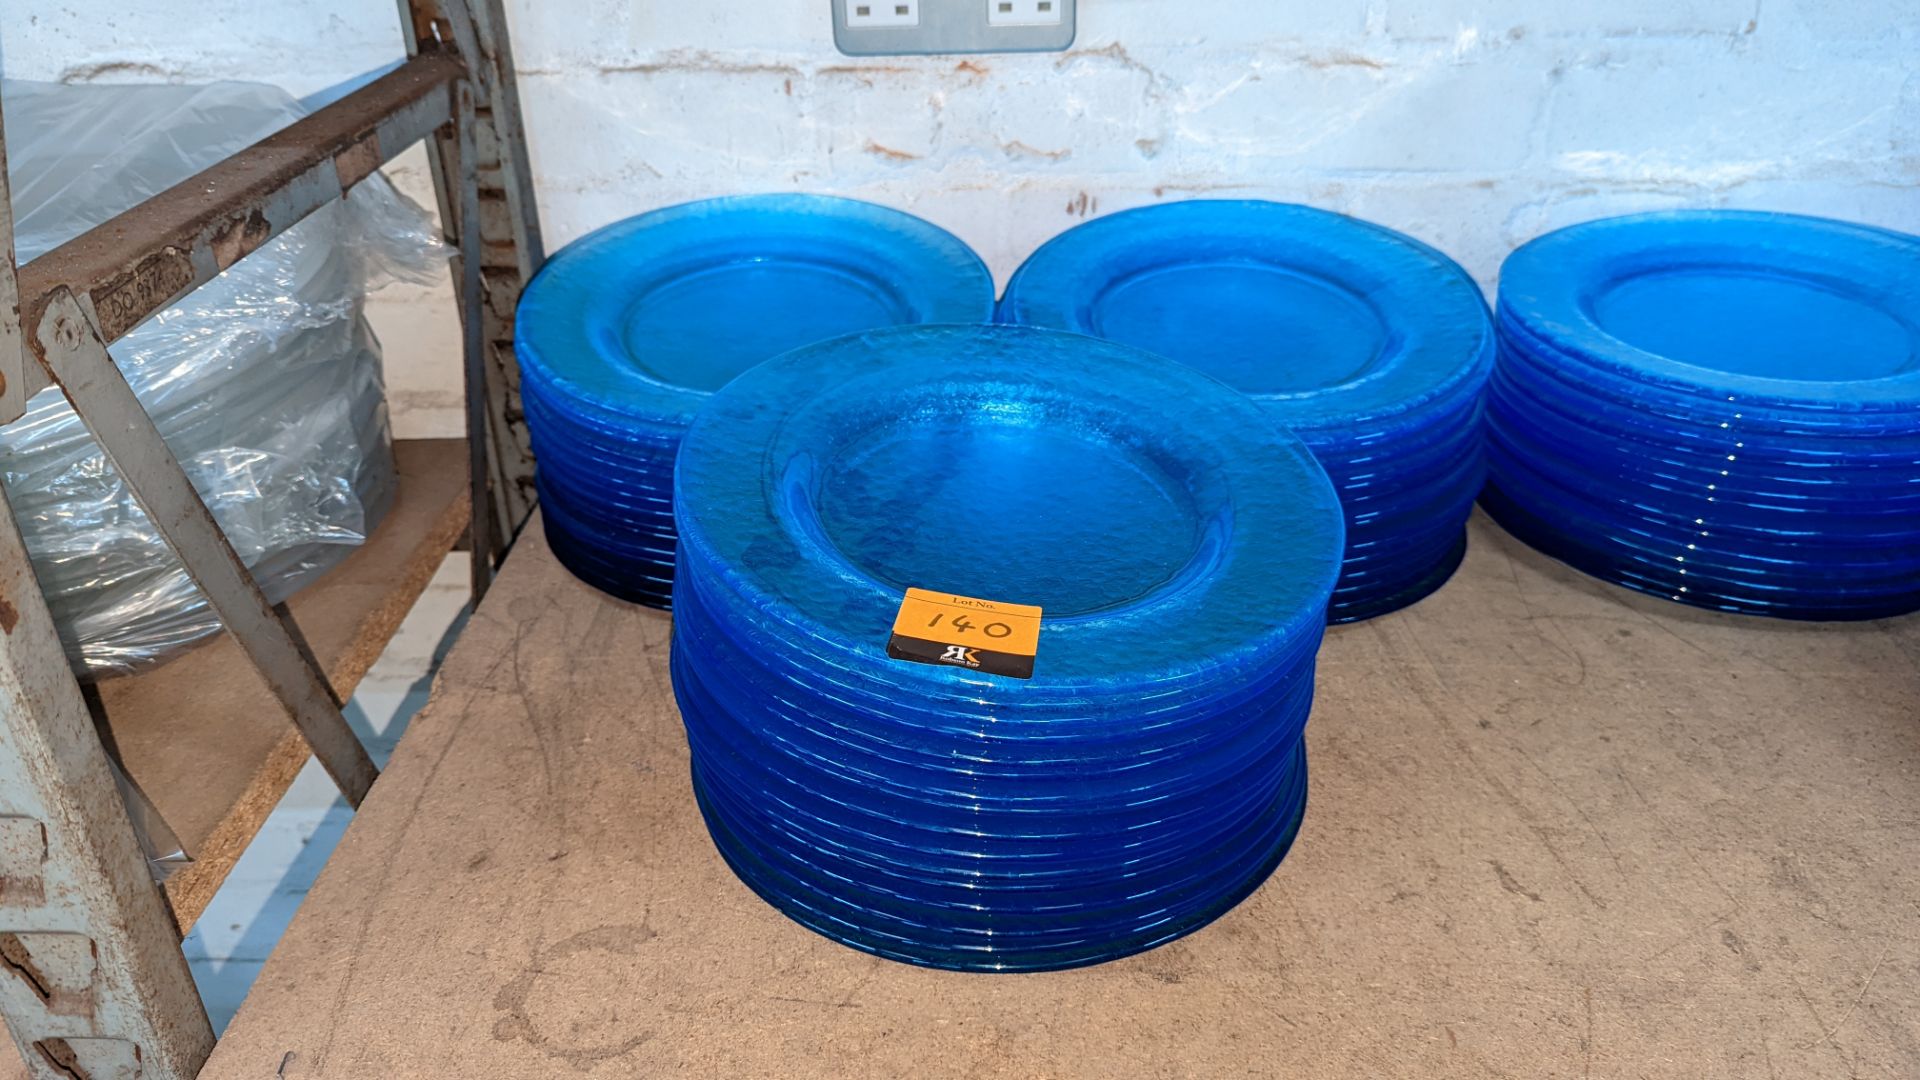 45 off blue glass plates each measuring approximately 275mm diameter (3 stacks)